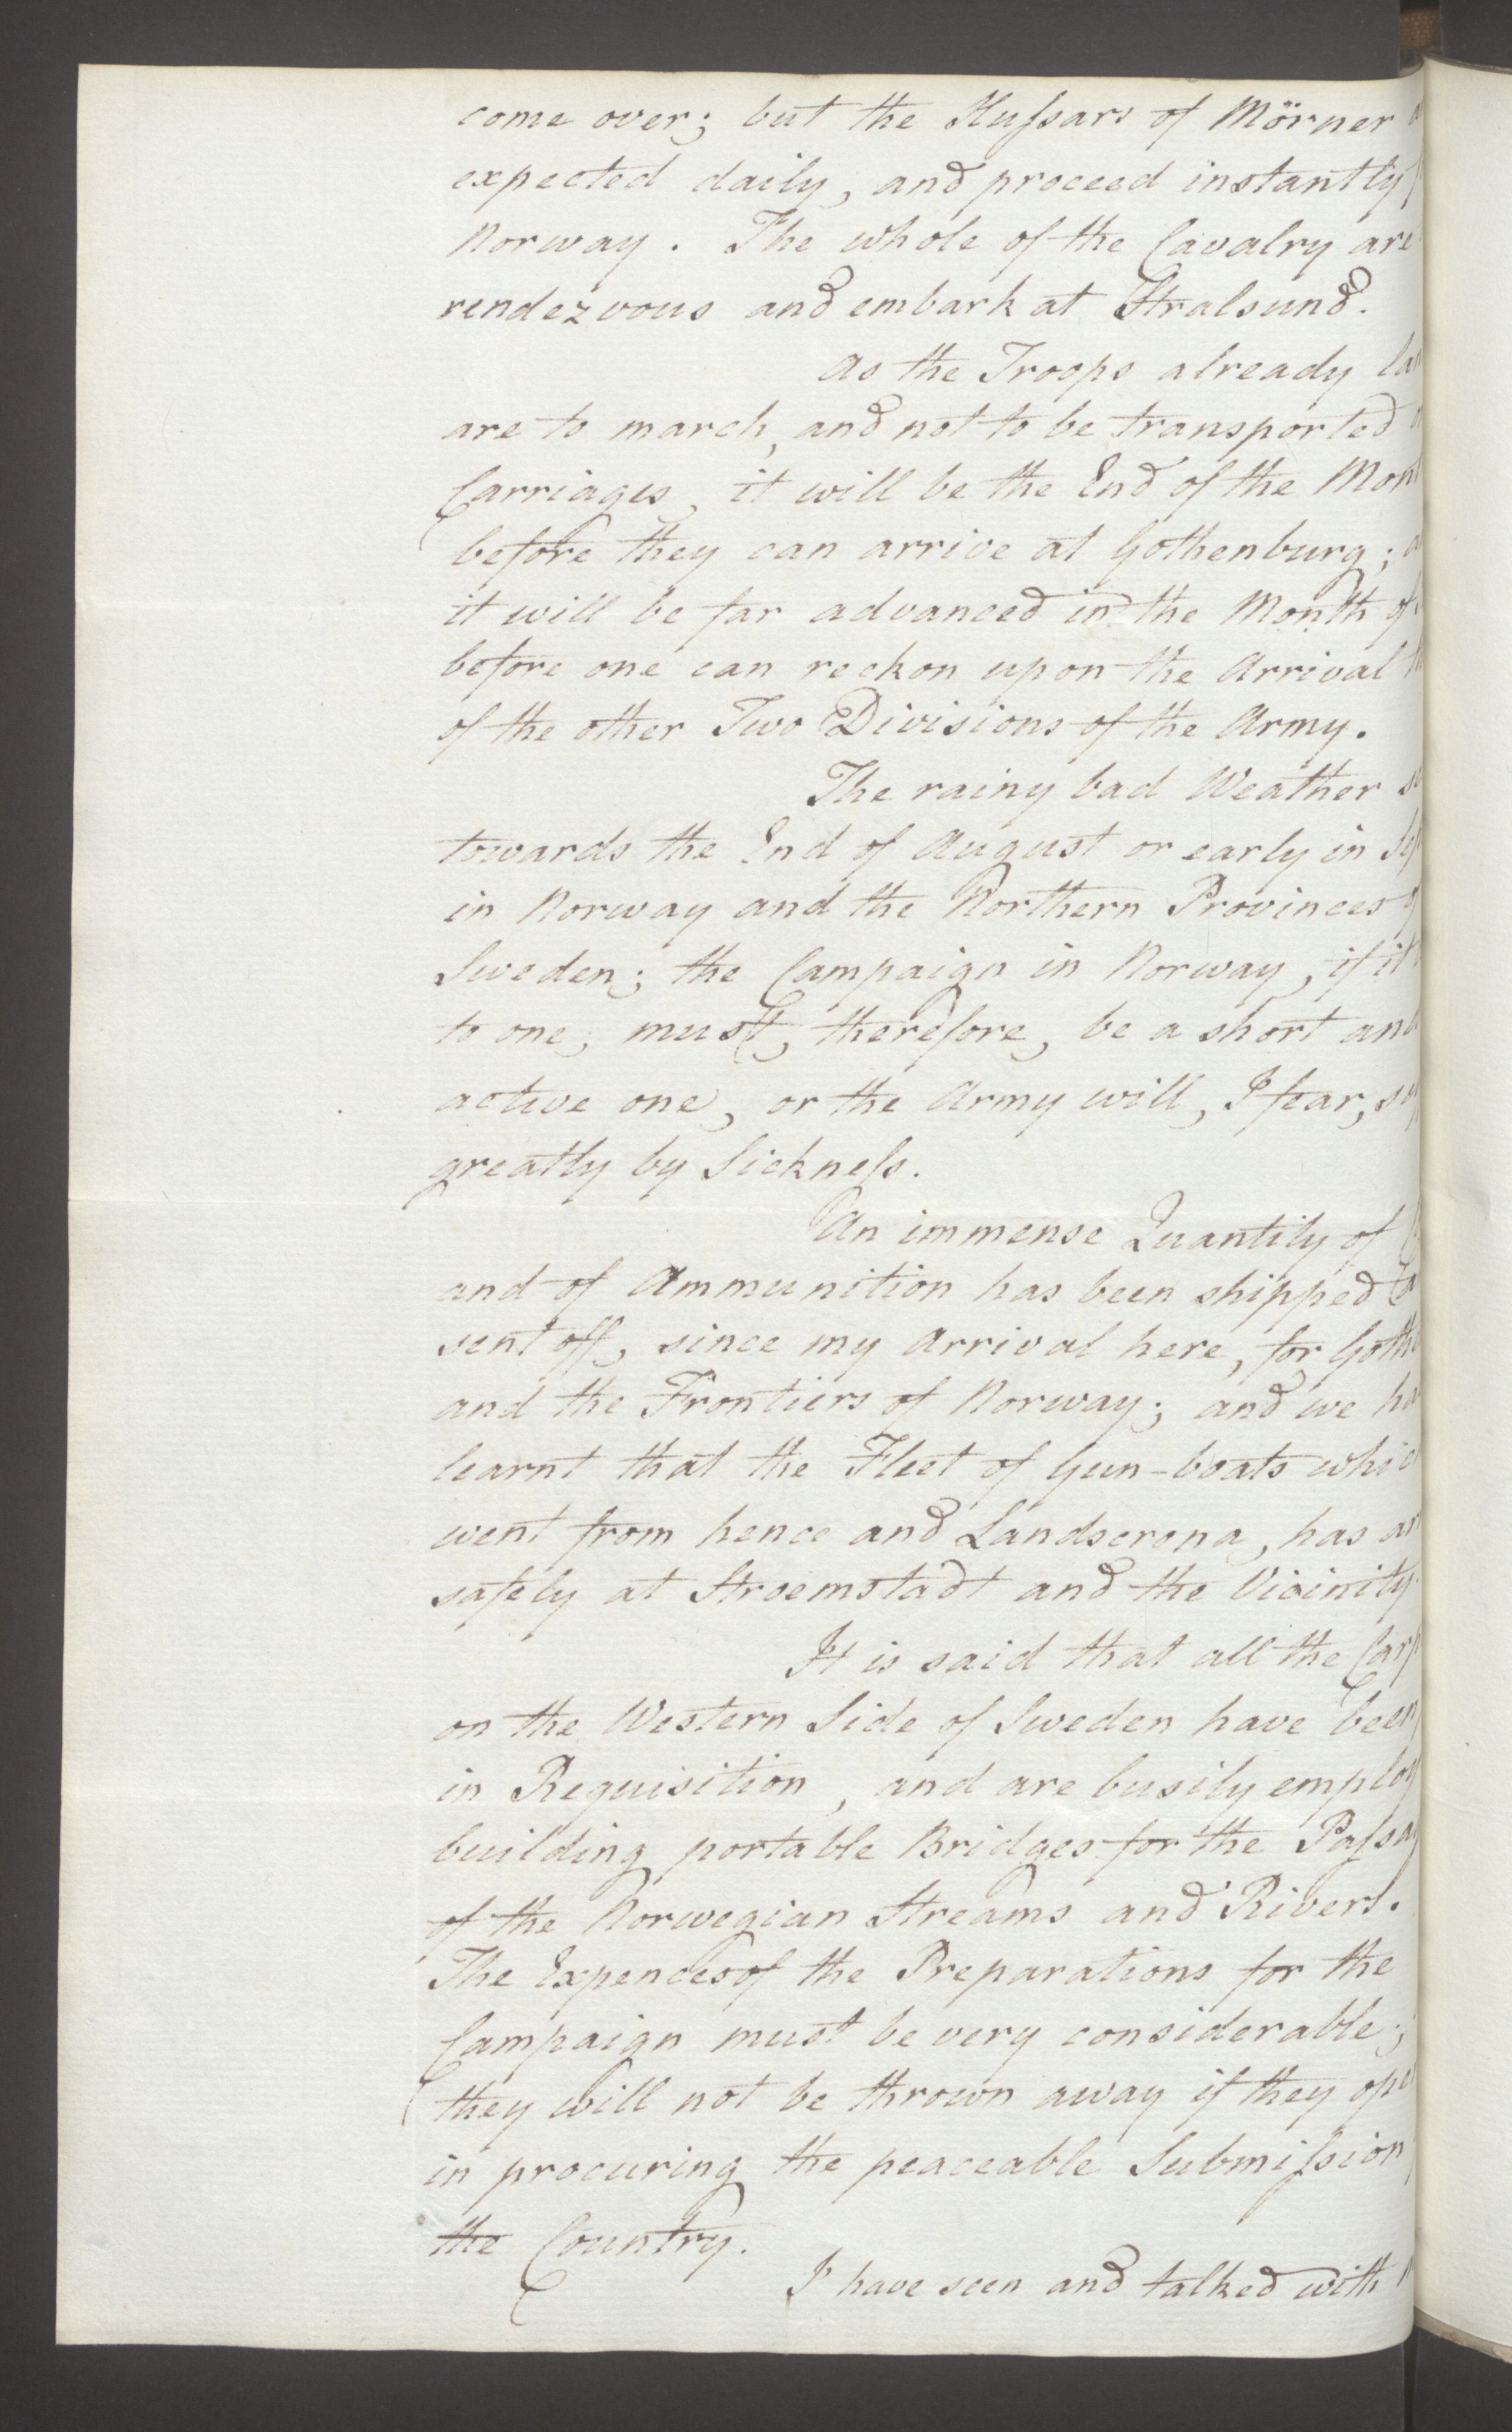 Foreign Office*, UKA/-/FO 38/16: Sir C. Gordon. Reports from Malmö, Jonkoping, and Helsingborg, 1814, p. 64